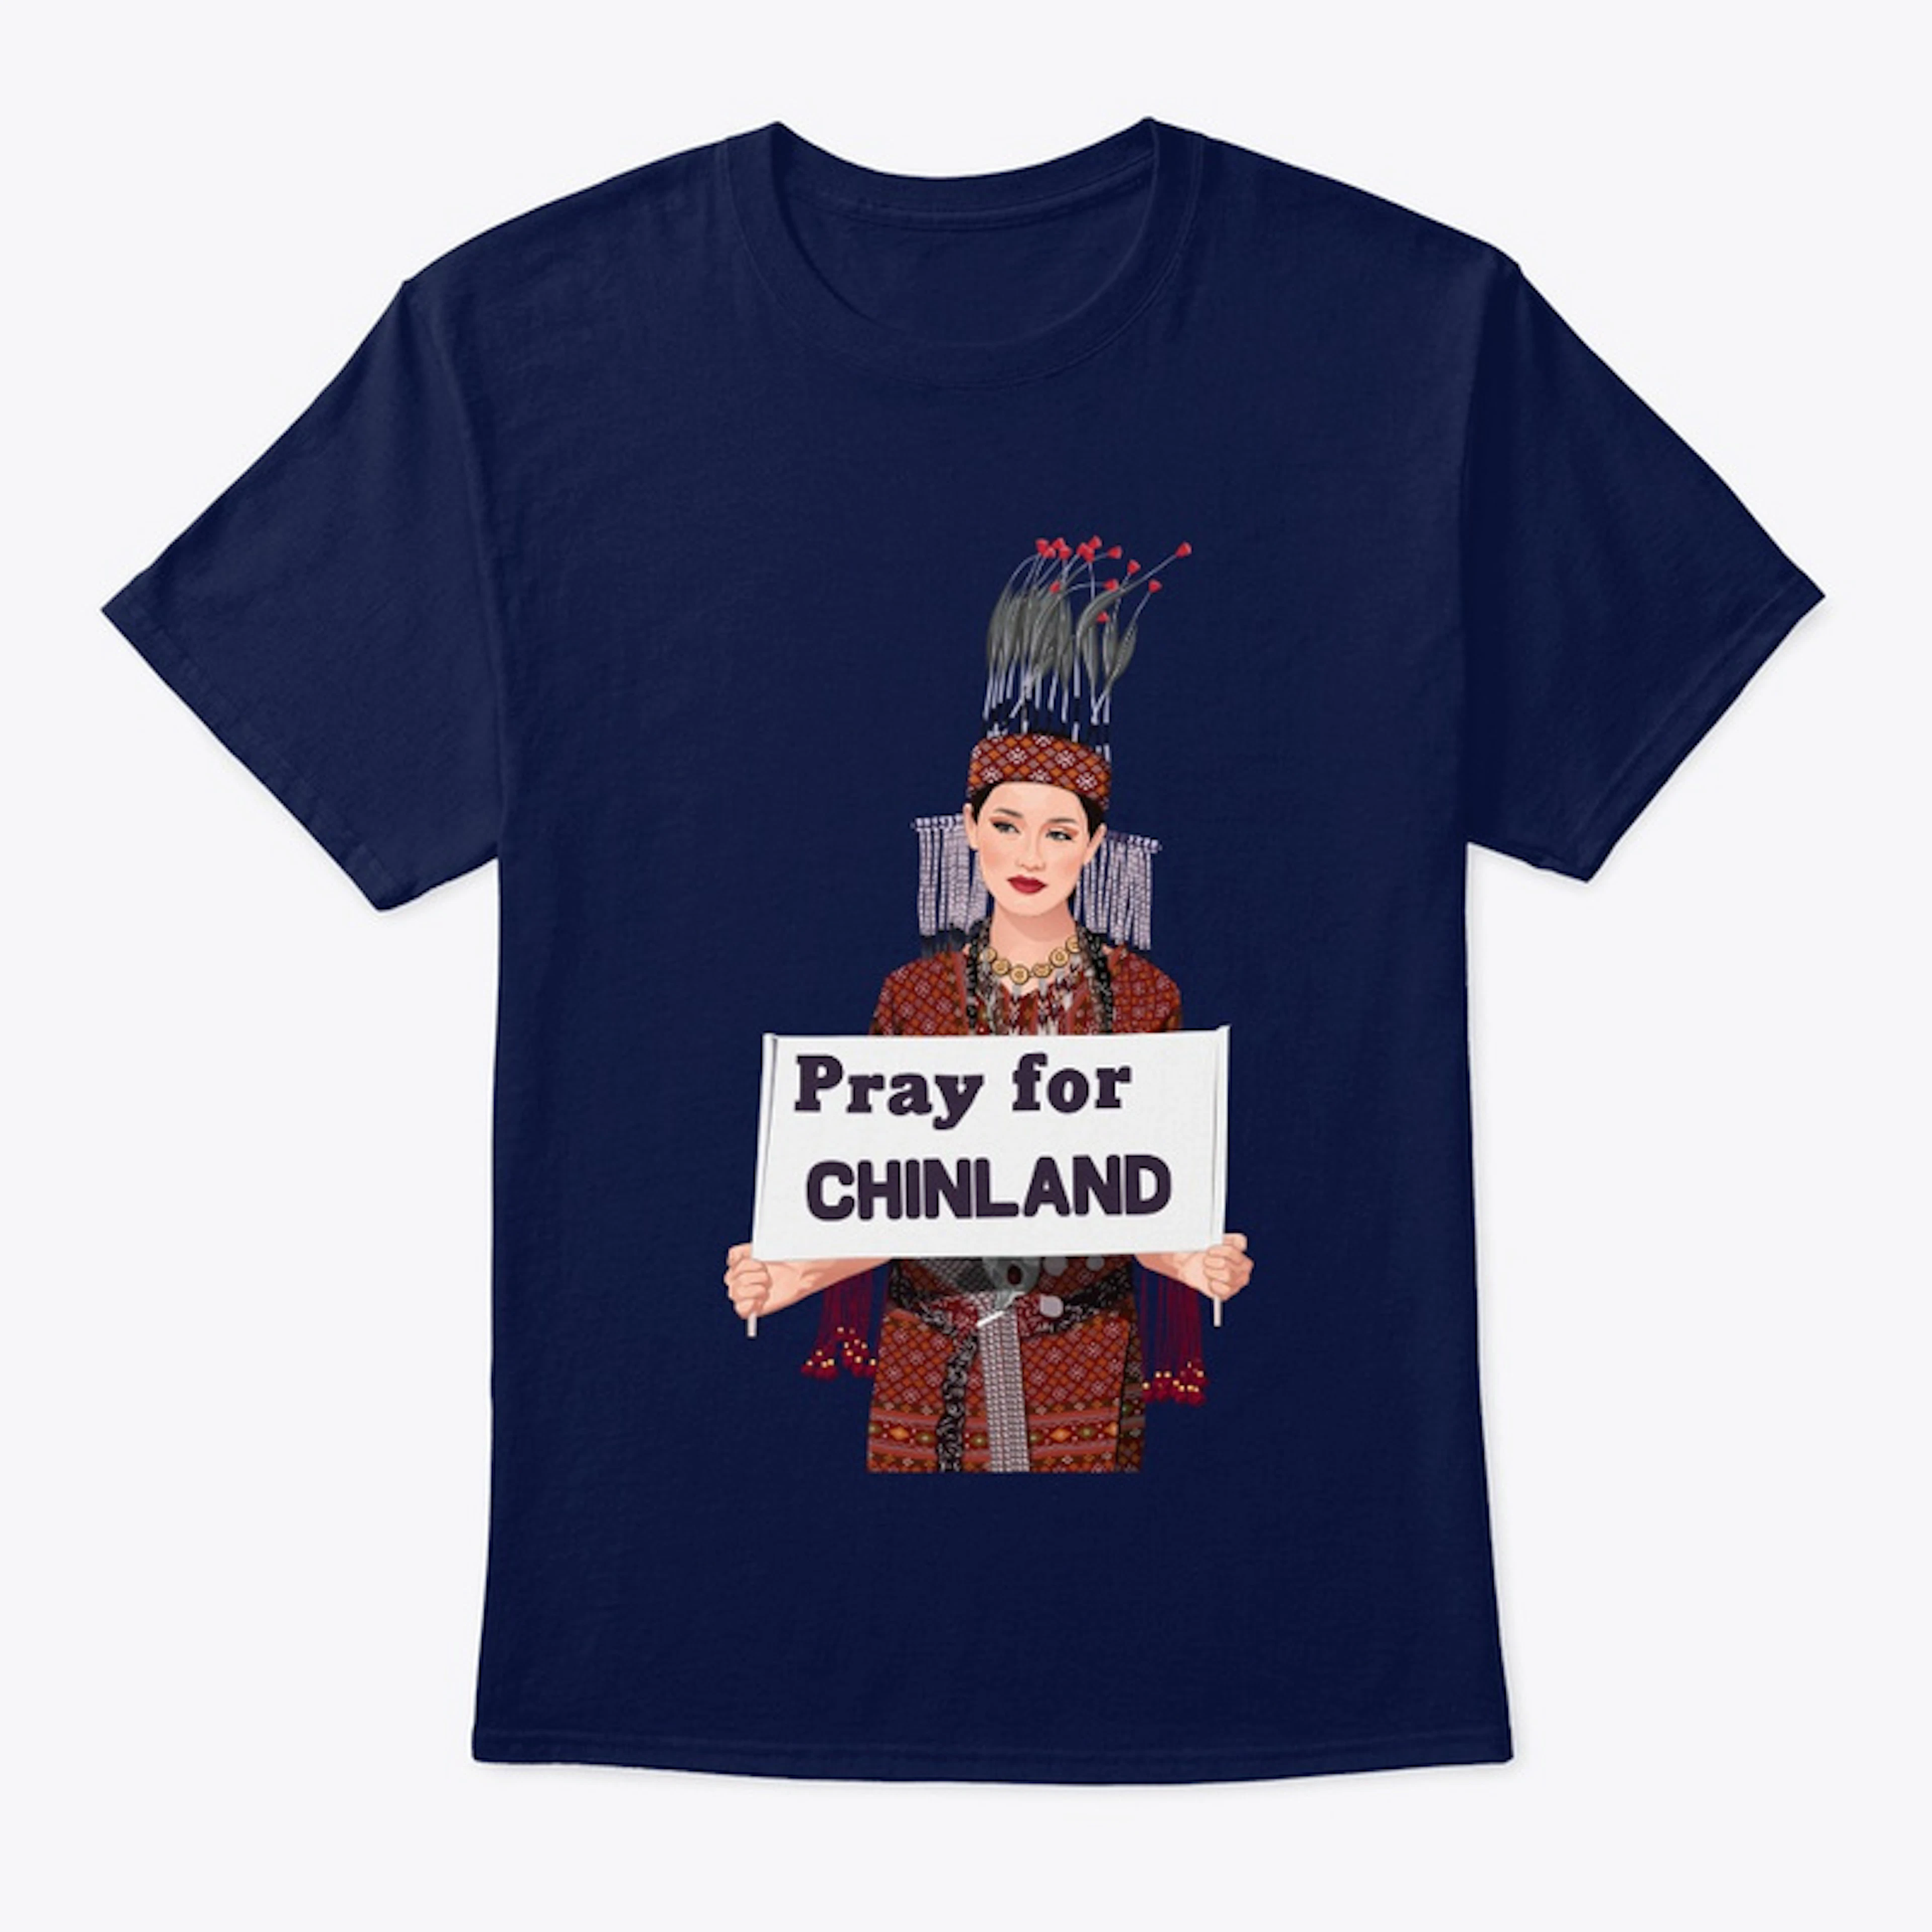 Show your Support for Chinland